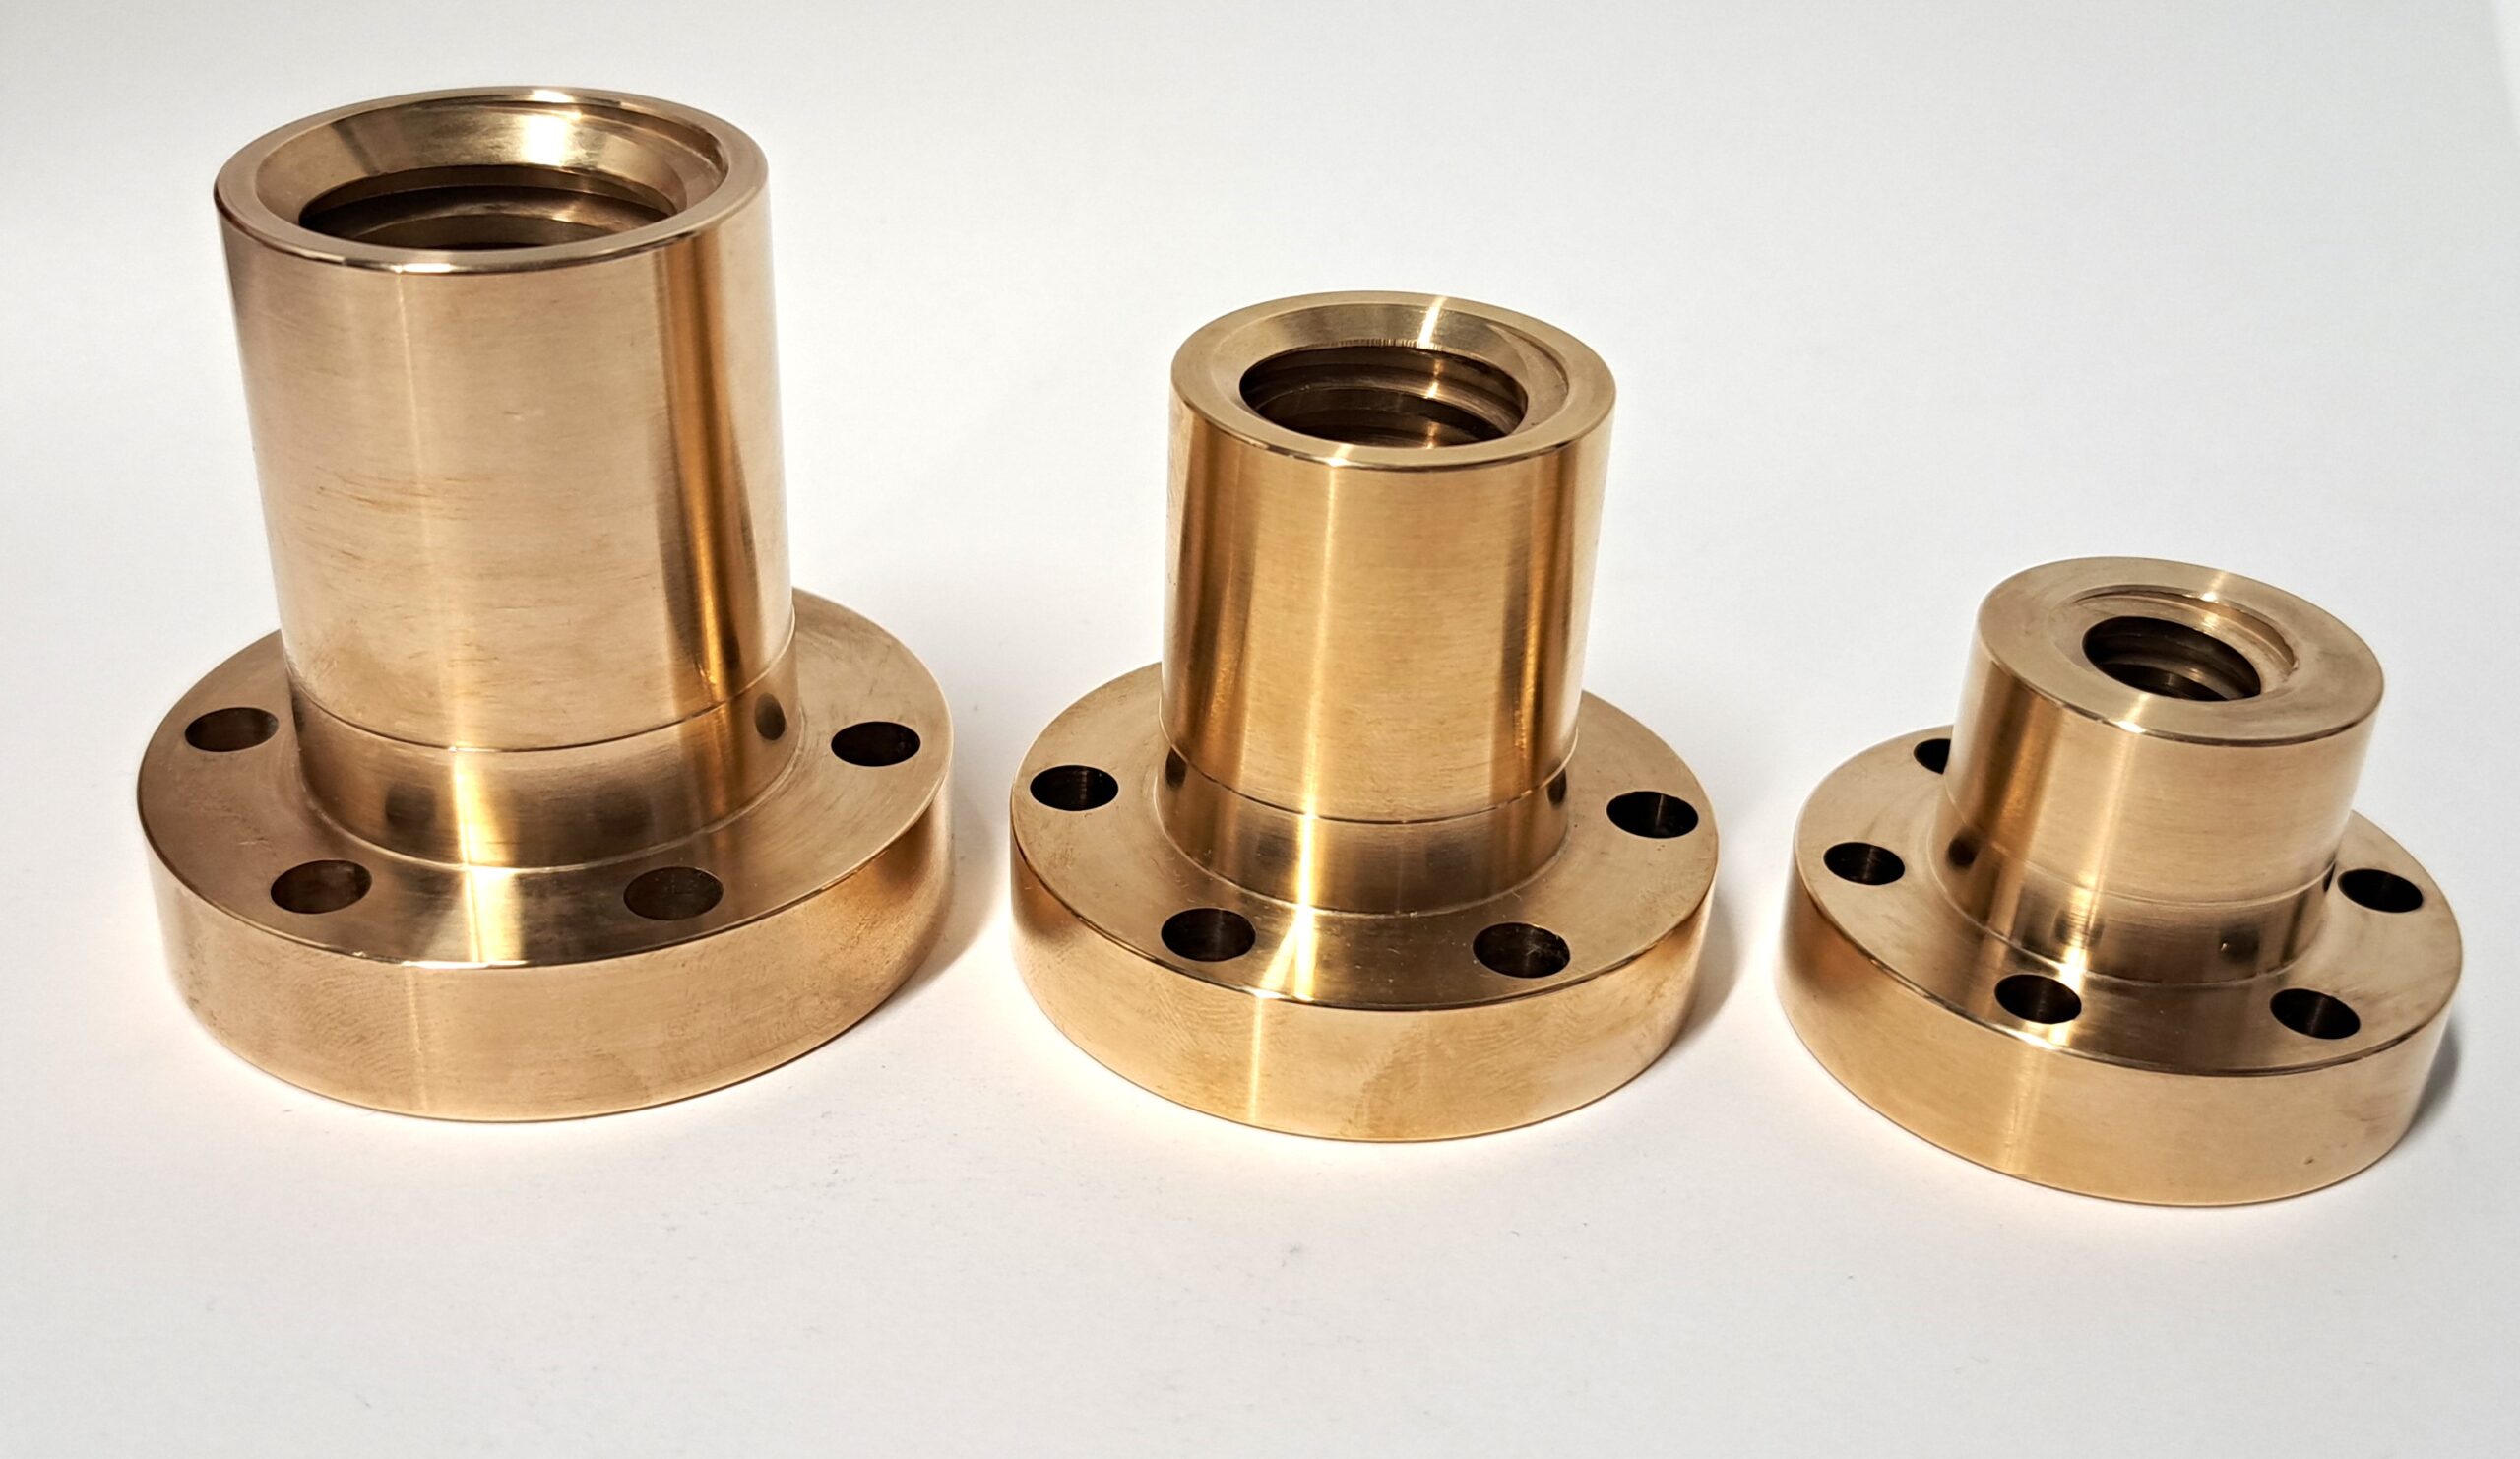 Trapezoidal threaded flang nuts